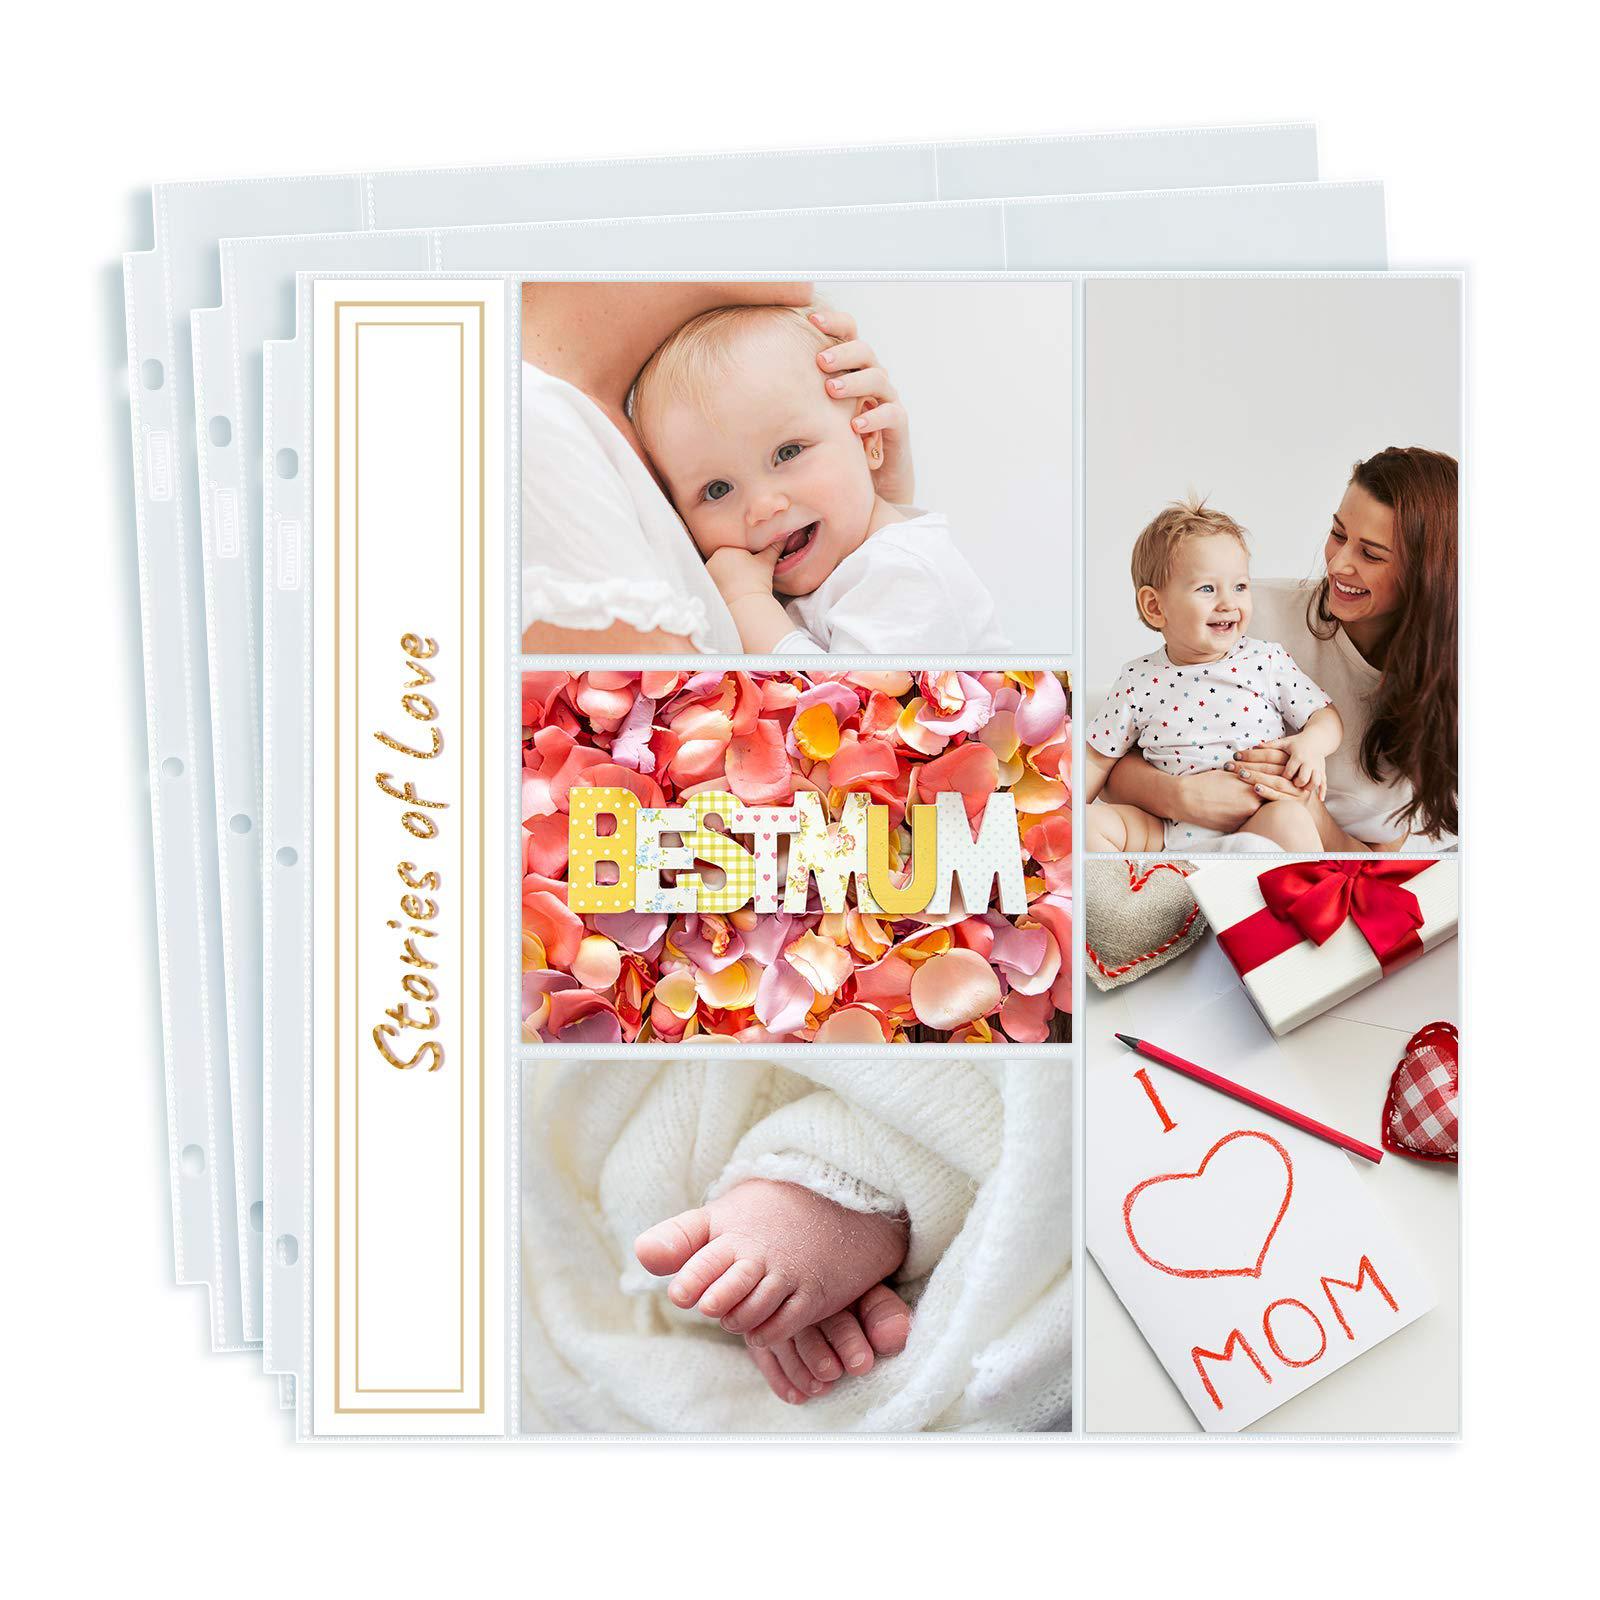 Dunwell dunwell photo album refill pages 12x12 - (4x6 mixed, 100 pack)  holds 1000 4x6 photos, 4x6 photo sleeves for 3 ring scrapbook